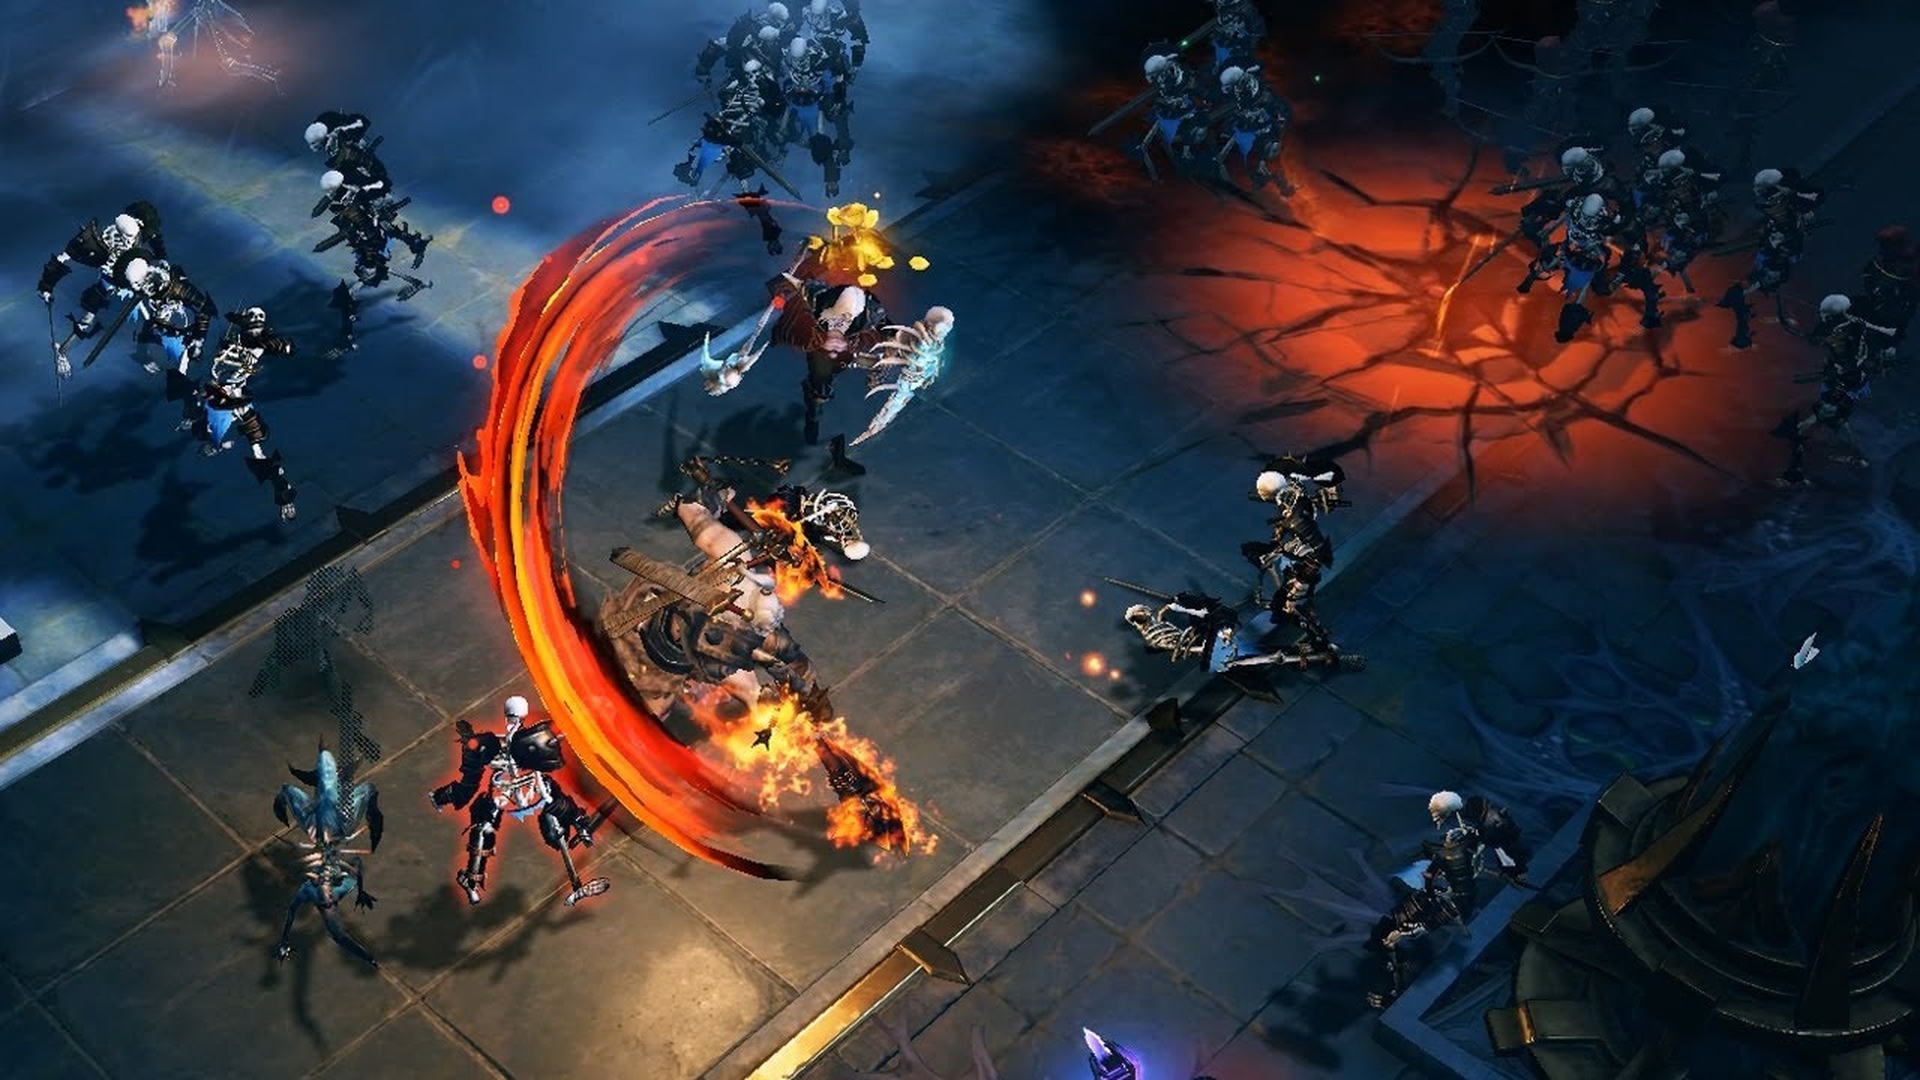 Today, we are giving you our Diablo Immortal Fading Ember and Runes guide, so you can understand the in-game mechanics and get a head start.